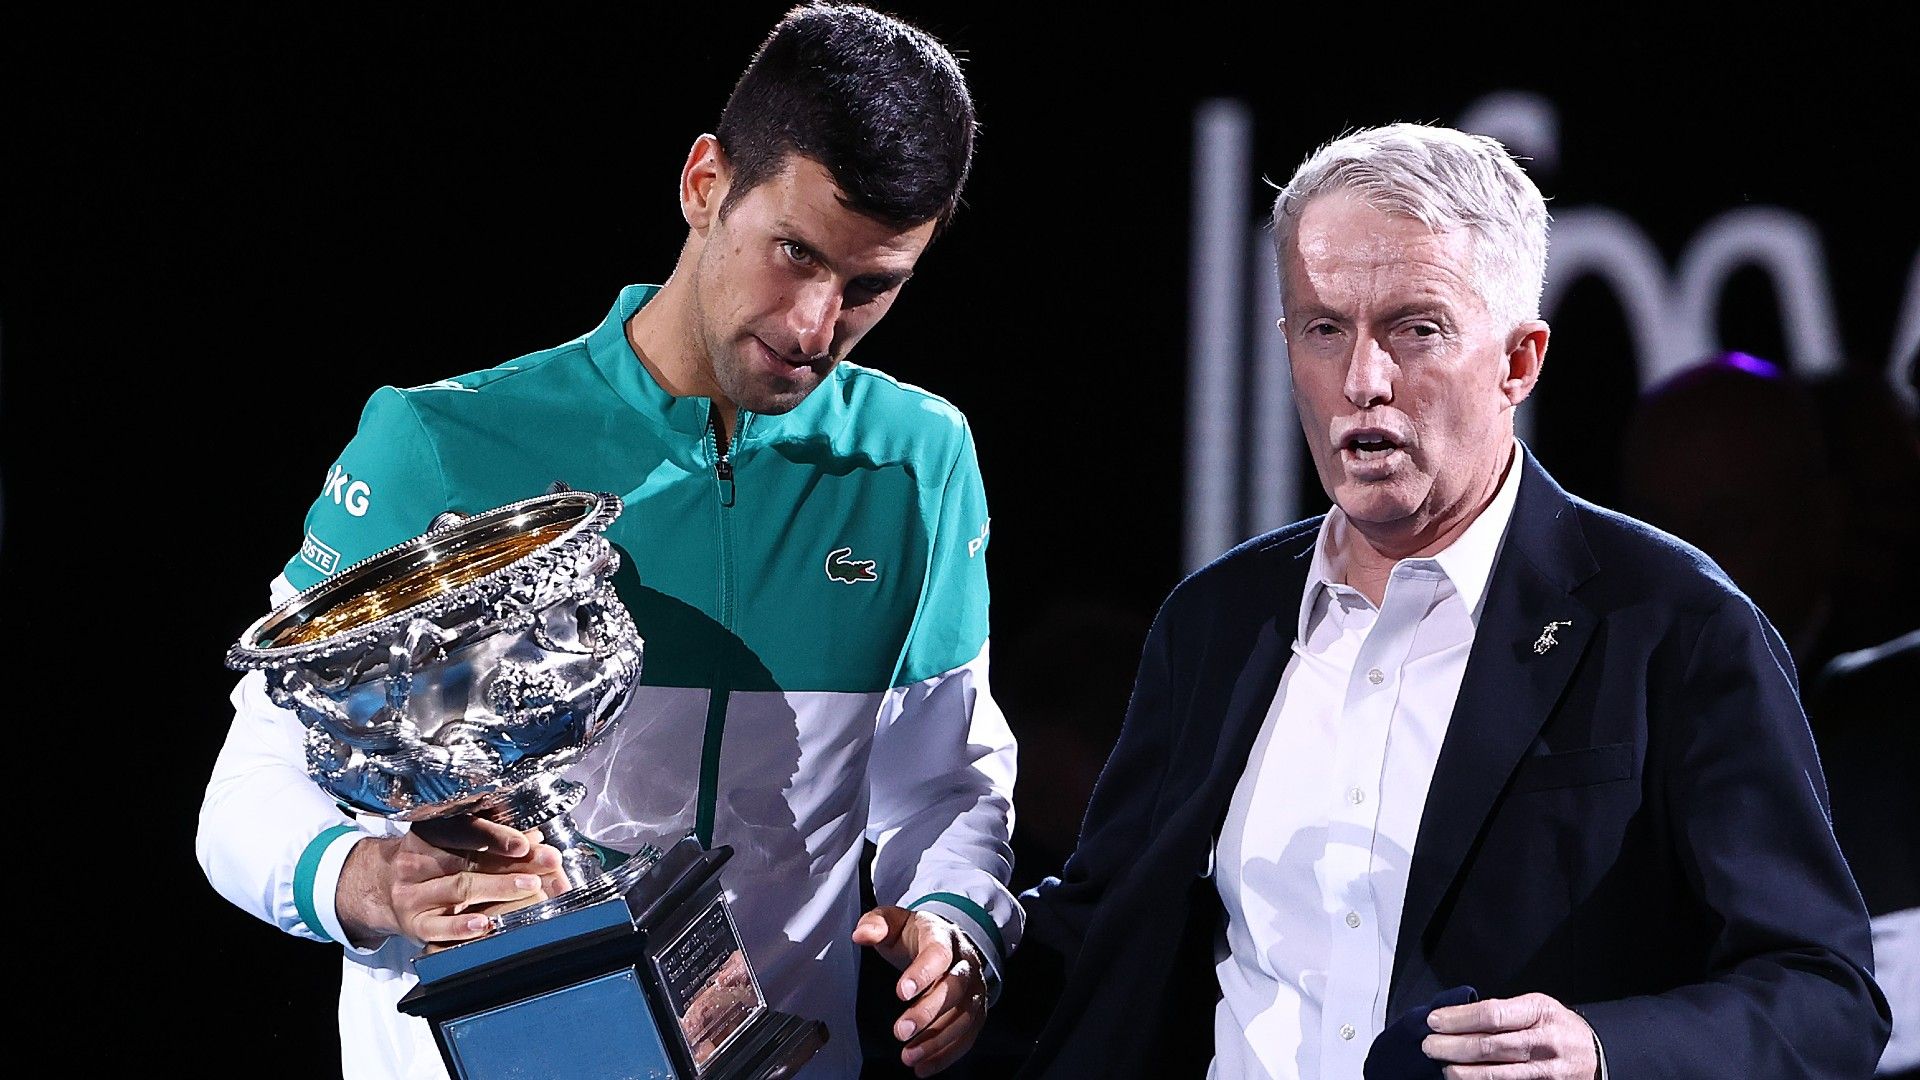 Players must be vaccinated to play at Australian Open, tournament chief confirms